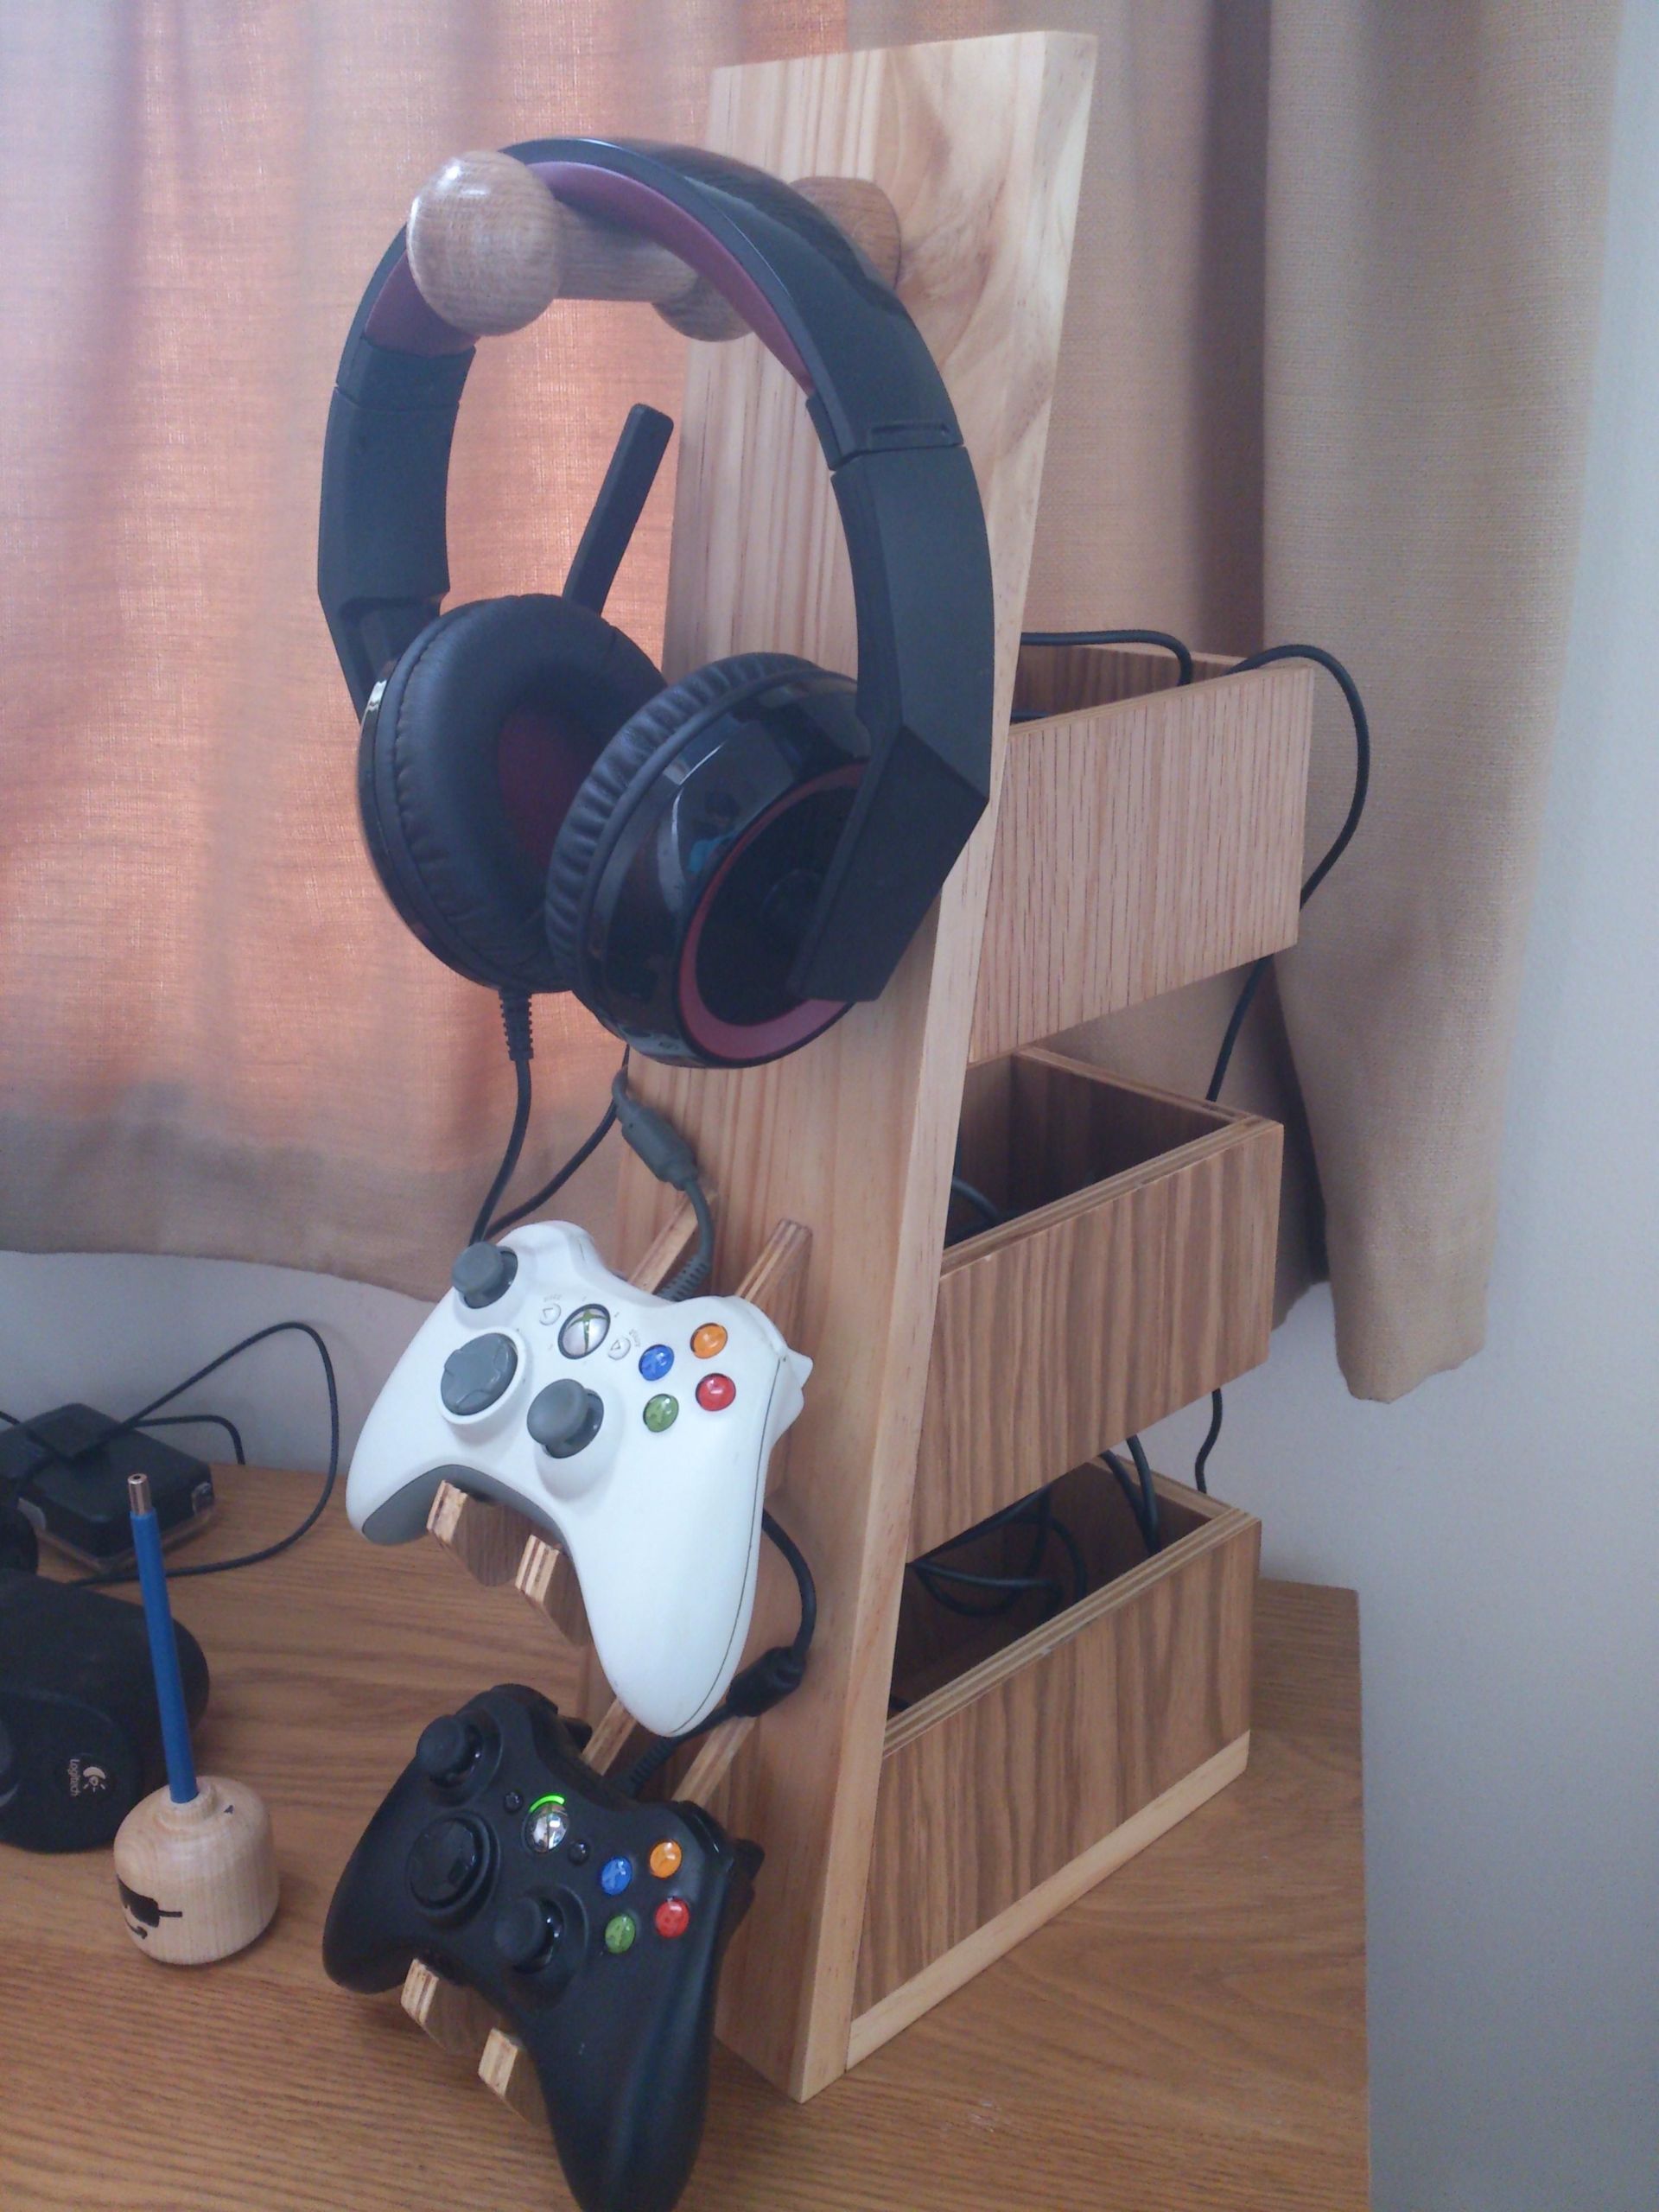 DIY Controller Rack
 The making of a headset and controller rack in 2019